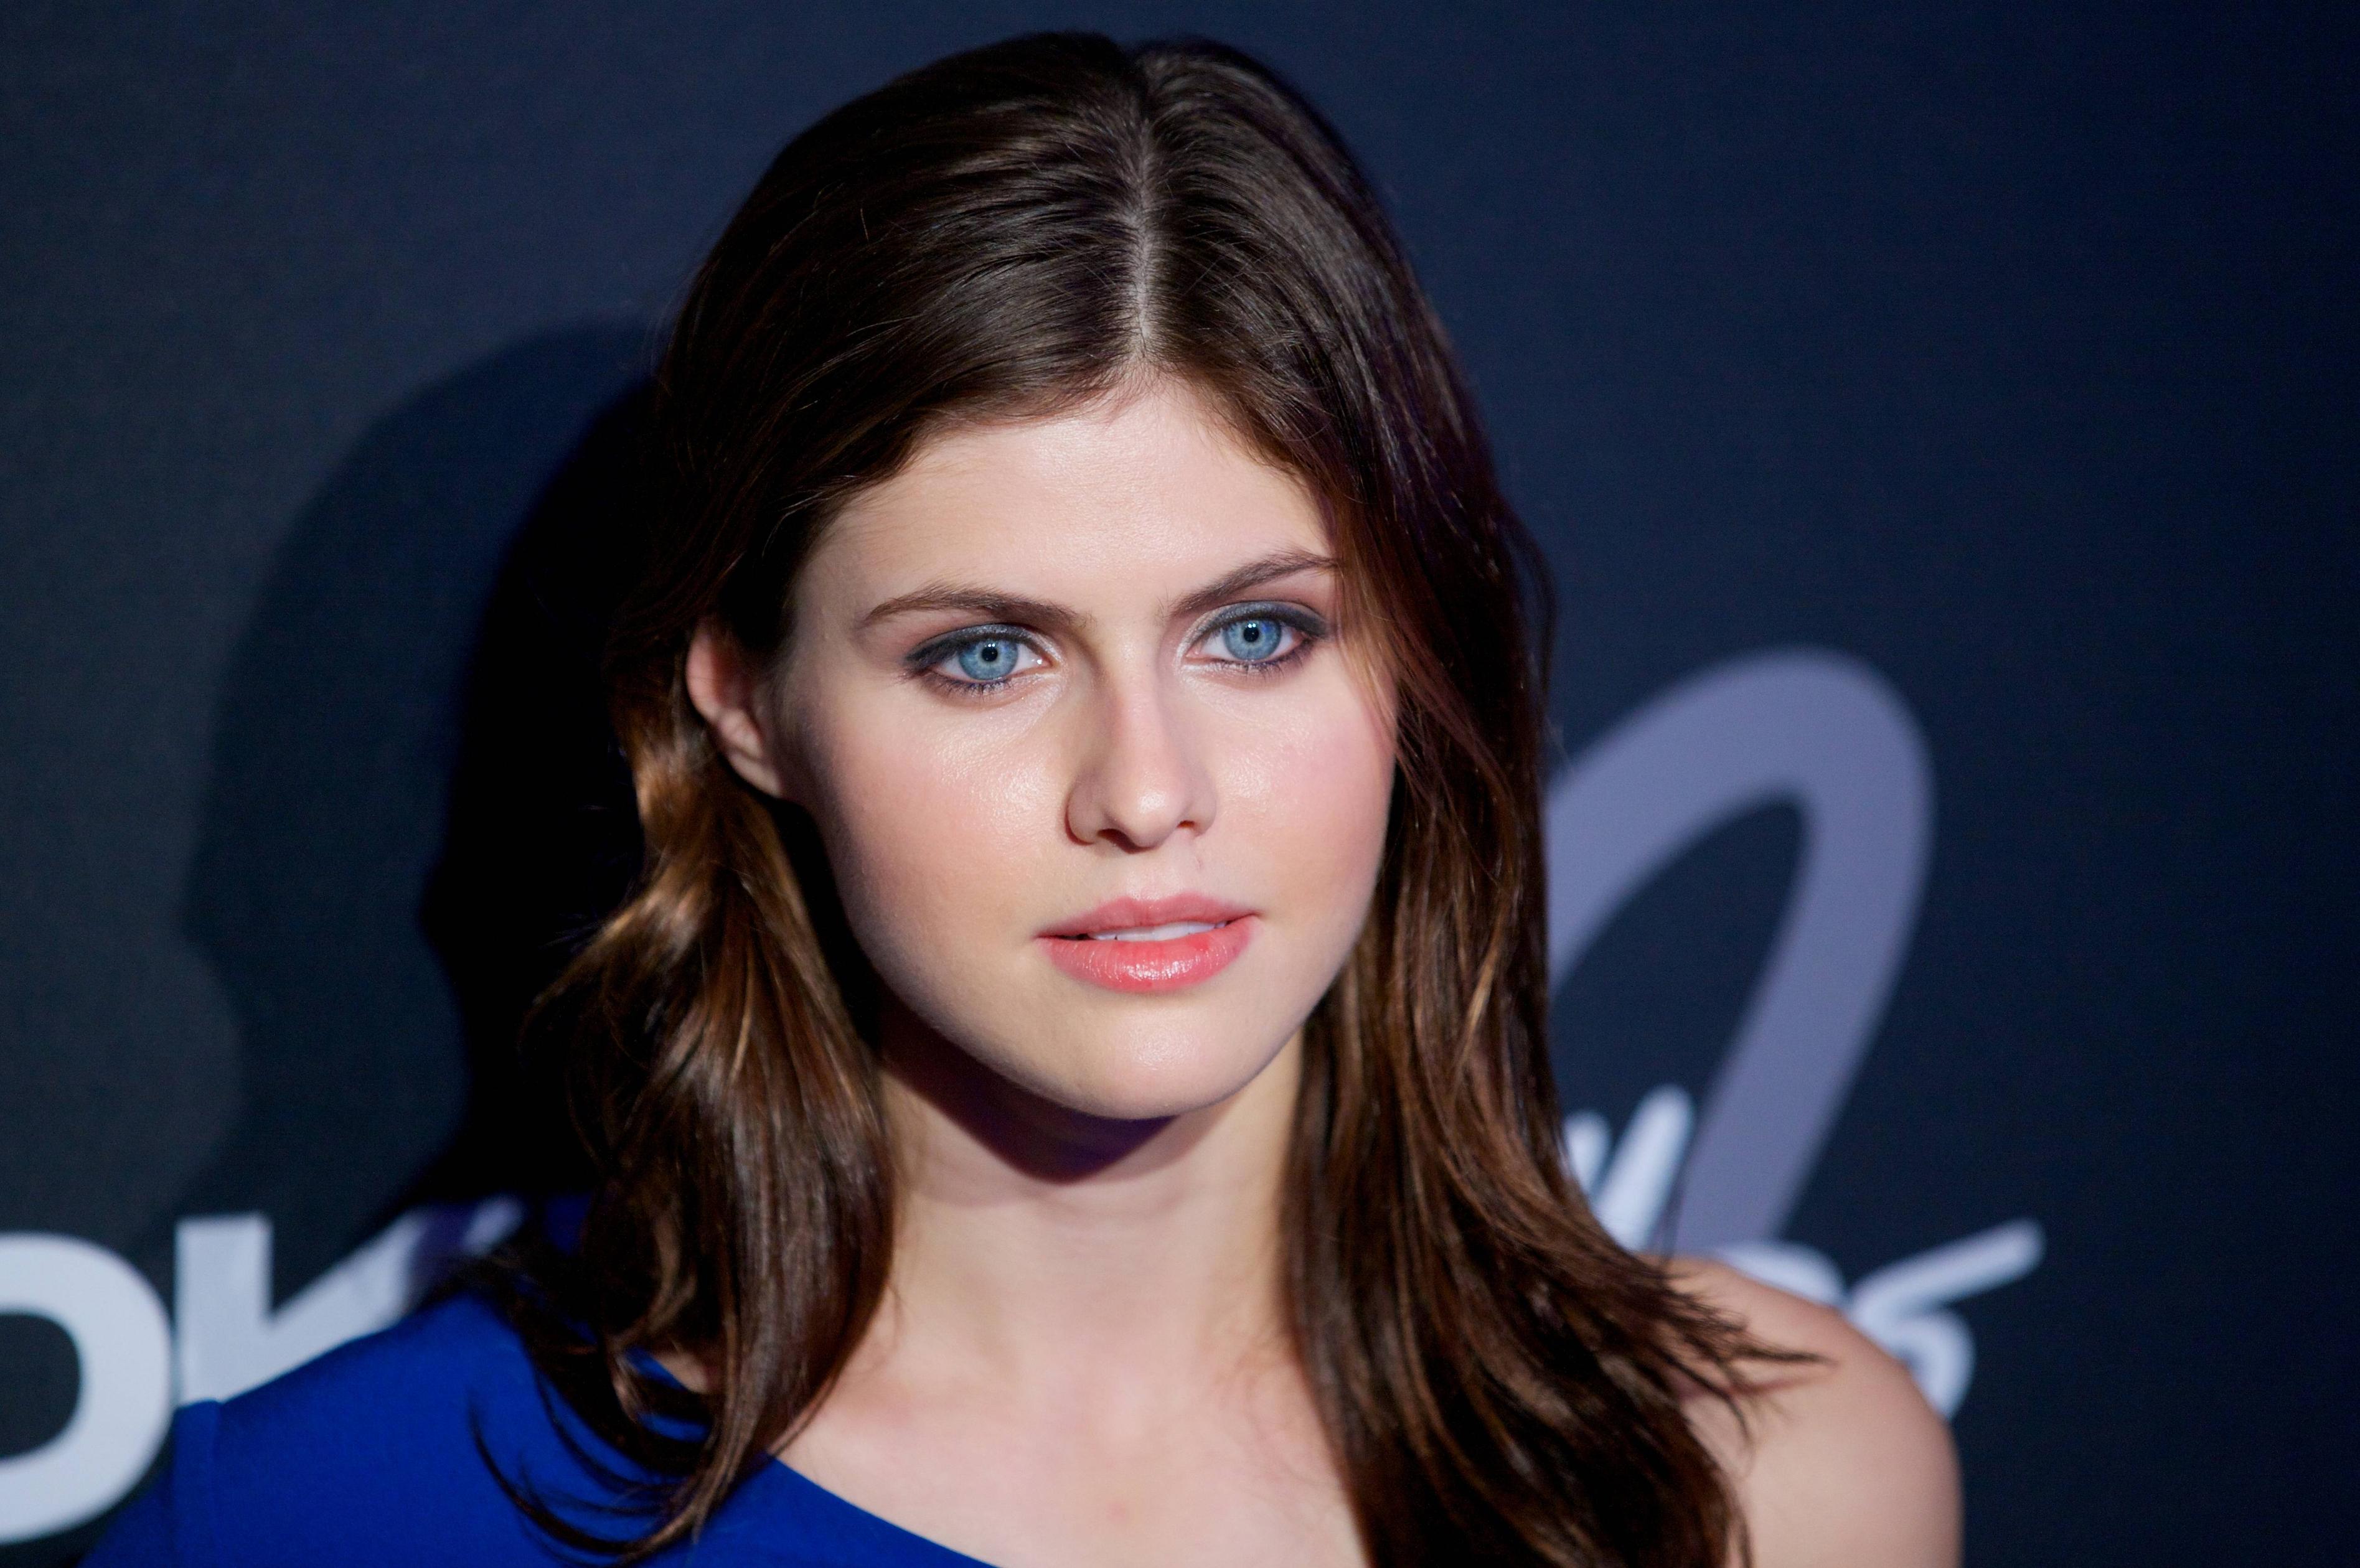 android american, actress, alexandra daddario, face, celebrity, blue eyes, brunette